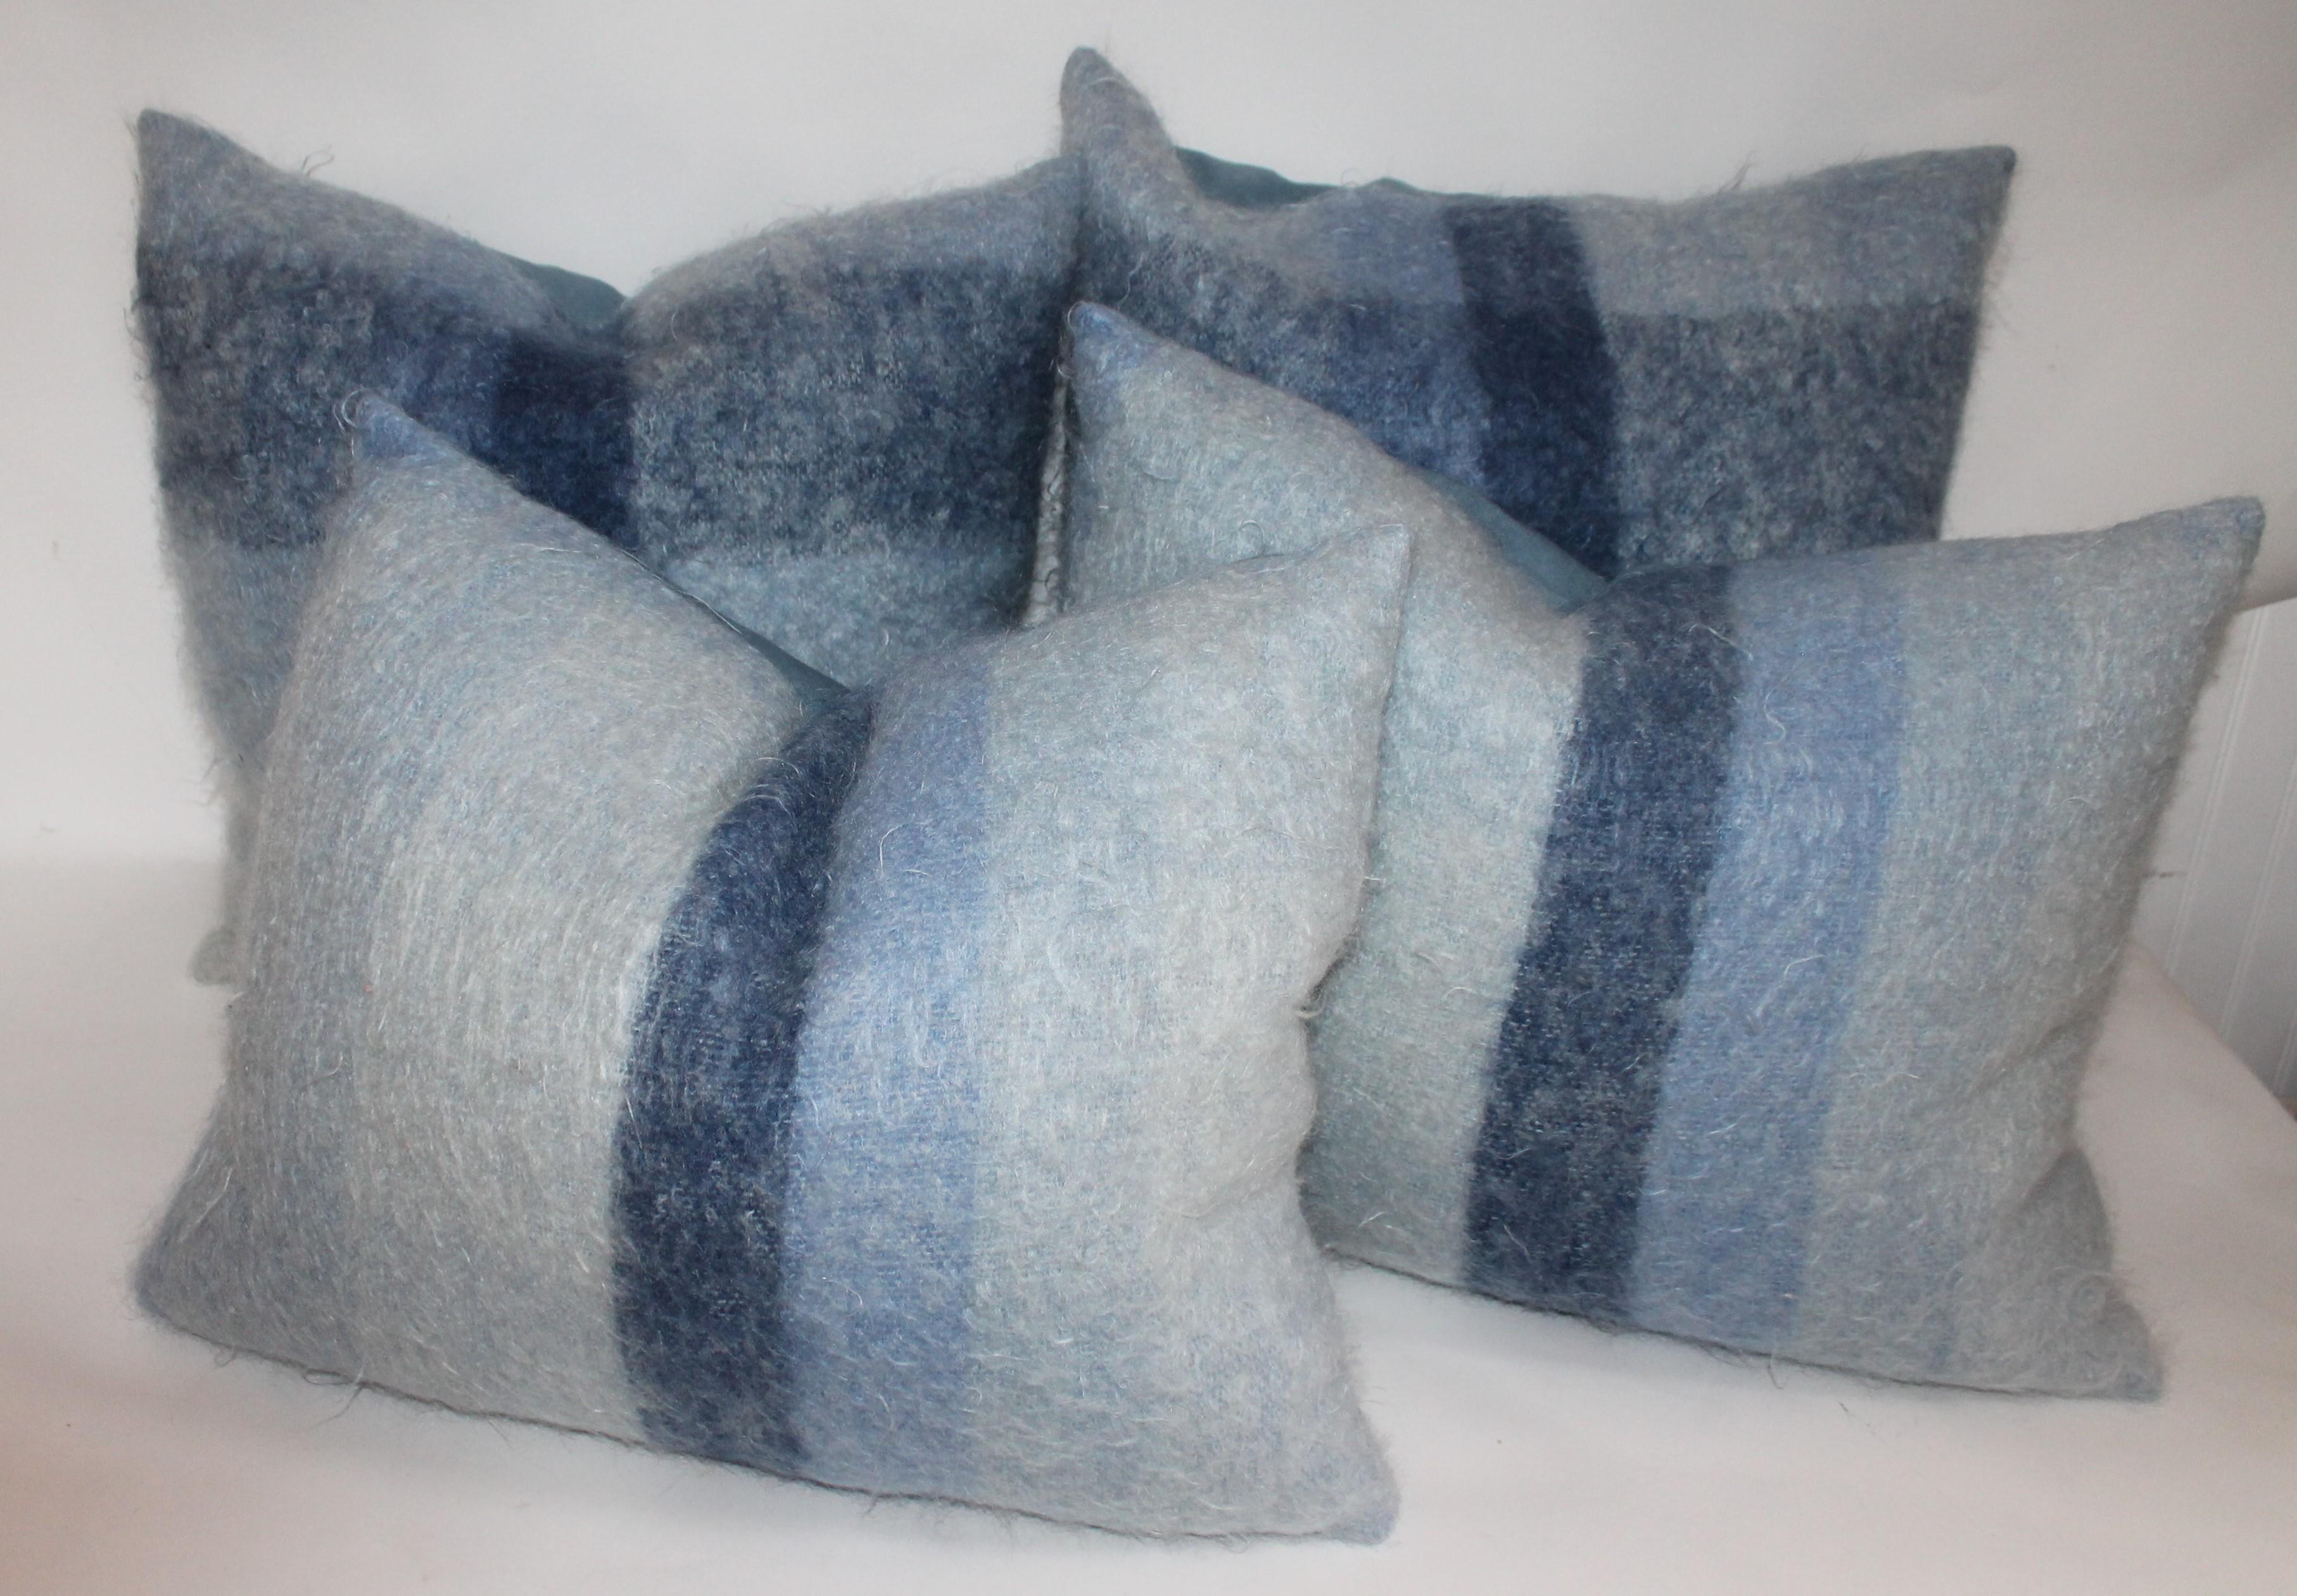 These two pairs of soft mohair or lambs wool pillows are in fine condition and have robin egg blue cotton linen backings. Sold as a collection of two pairs.

Pillows measure 
20 high x 20 wide
20 x 20
18 high x 21 wide.